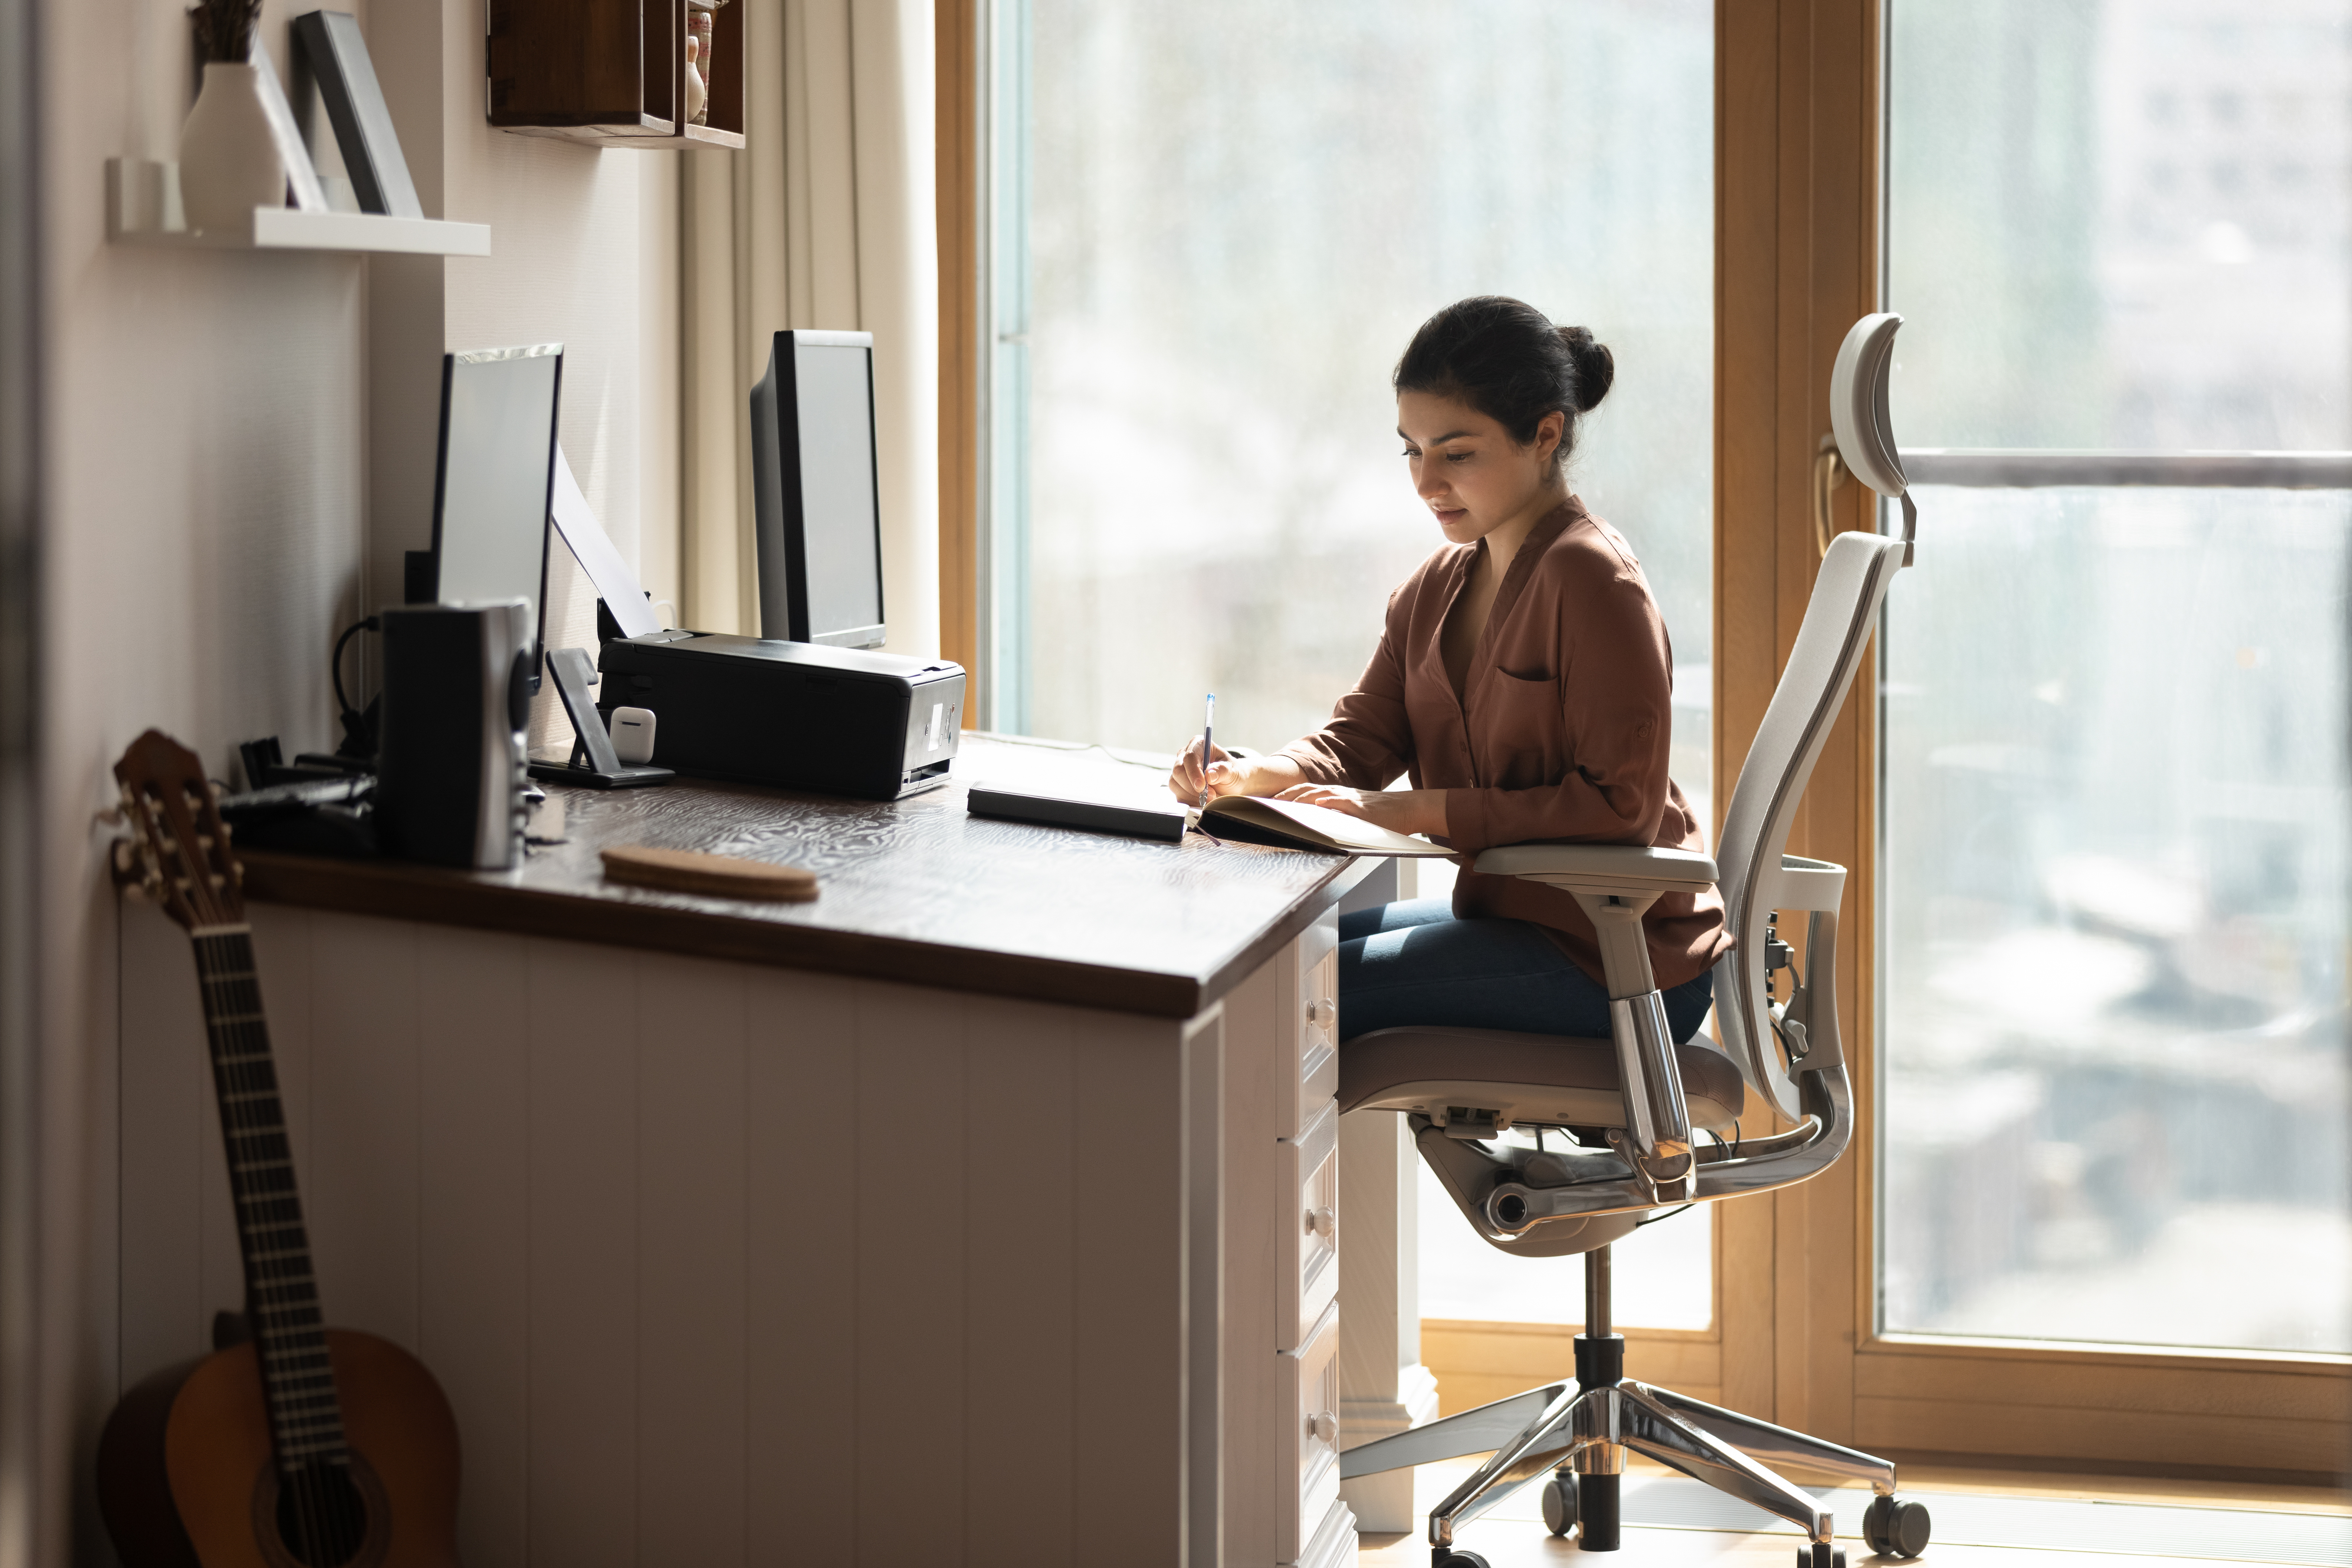 A young adult sitting at a desk in their home office in an office chair that supports their work needs.